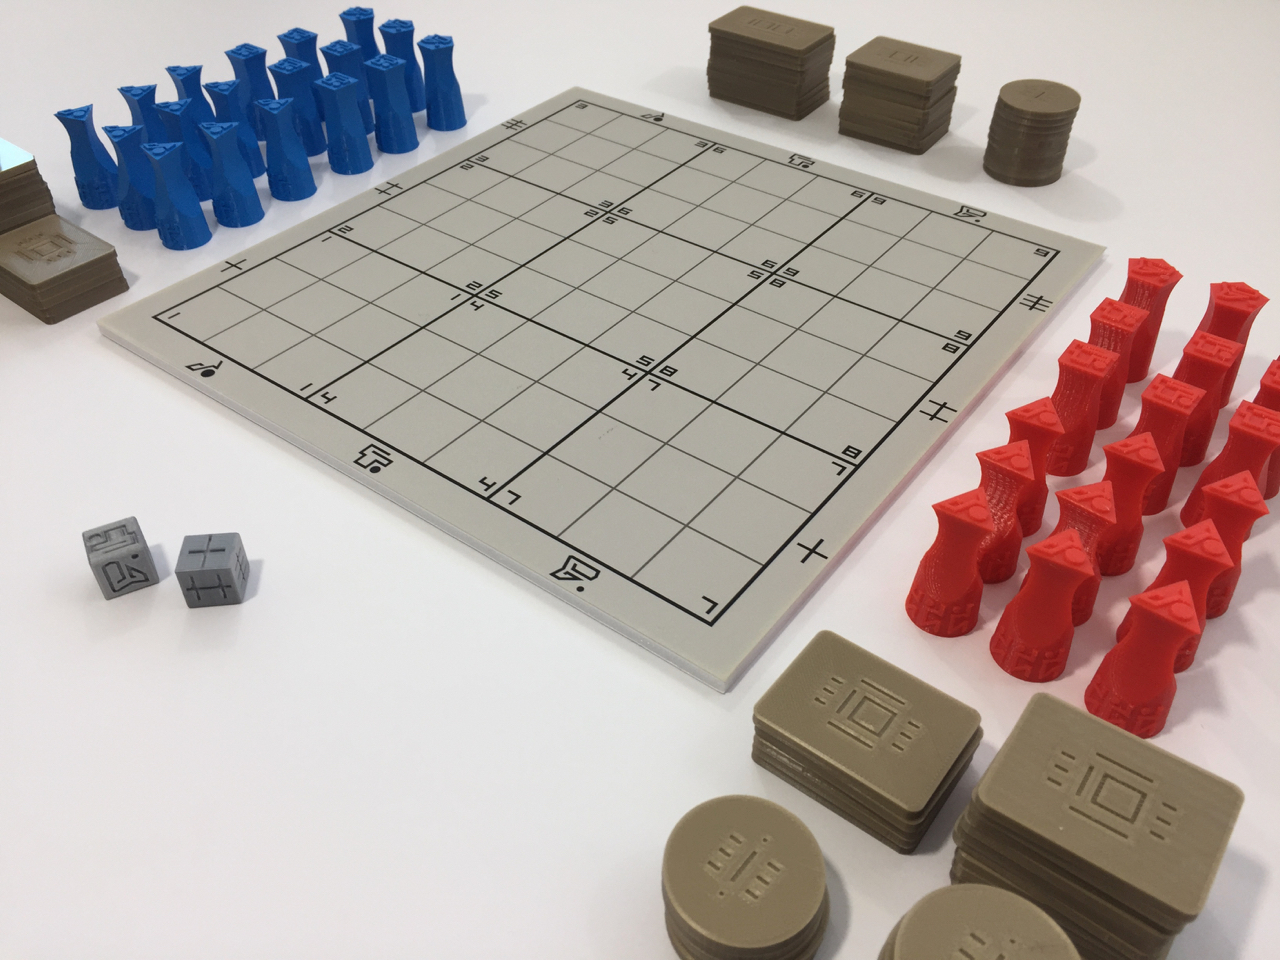 Elements and setup of the board game OFMOS (for play in Normal Mode)